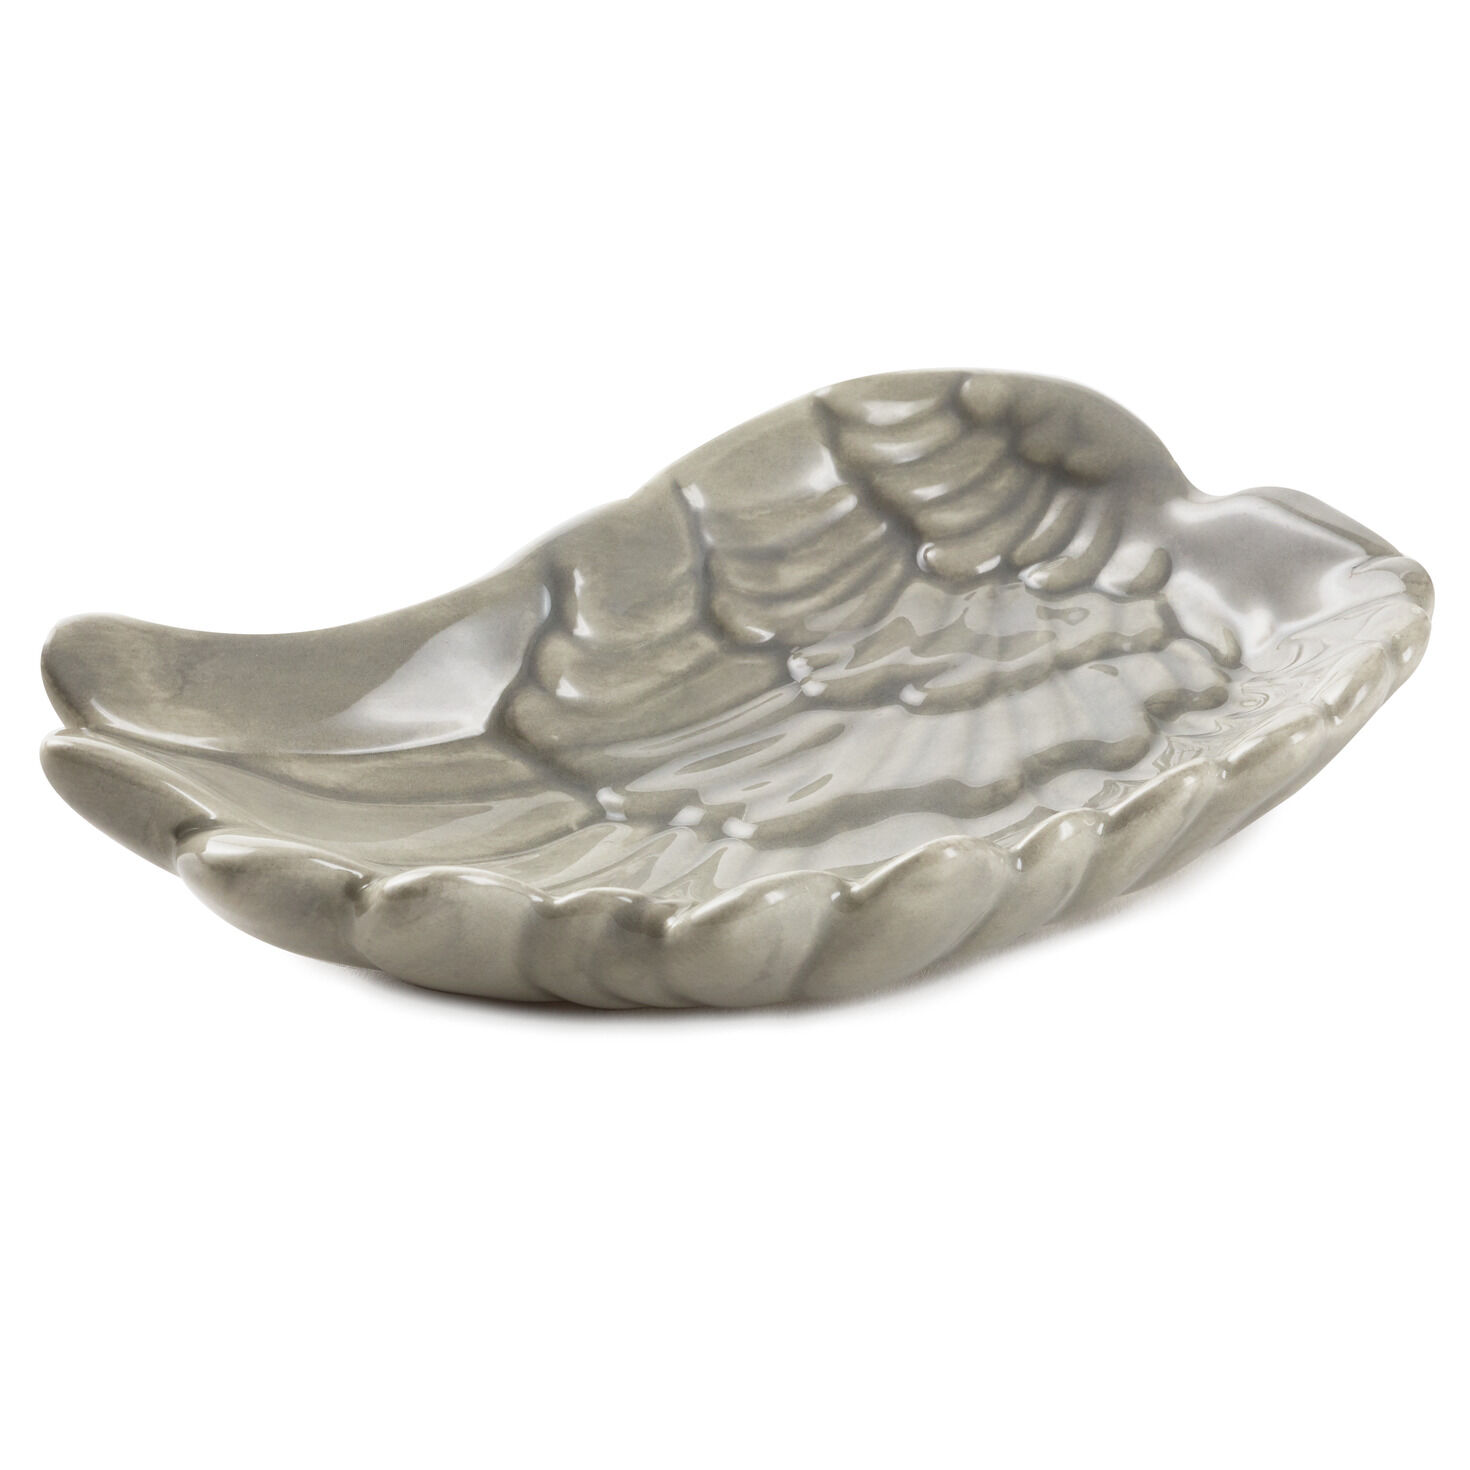 Multi colored tattered angel wings trinket dish